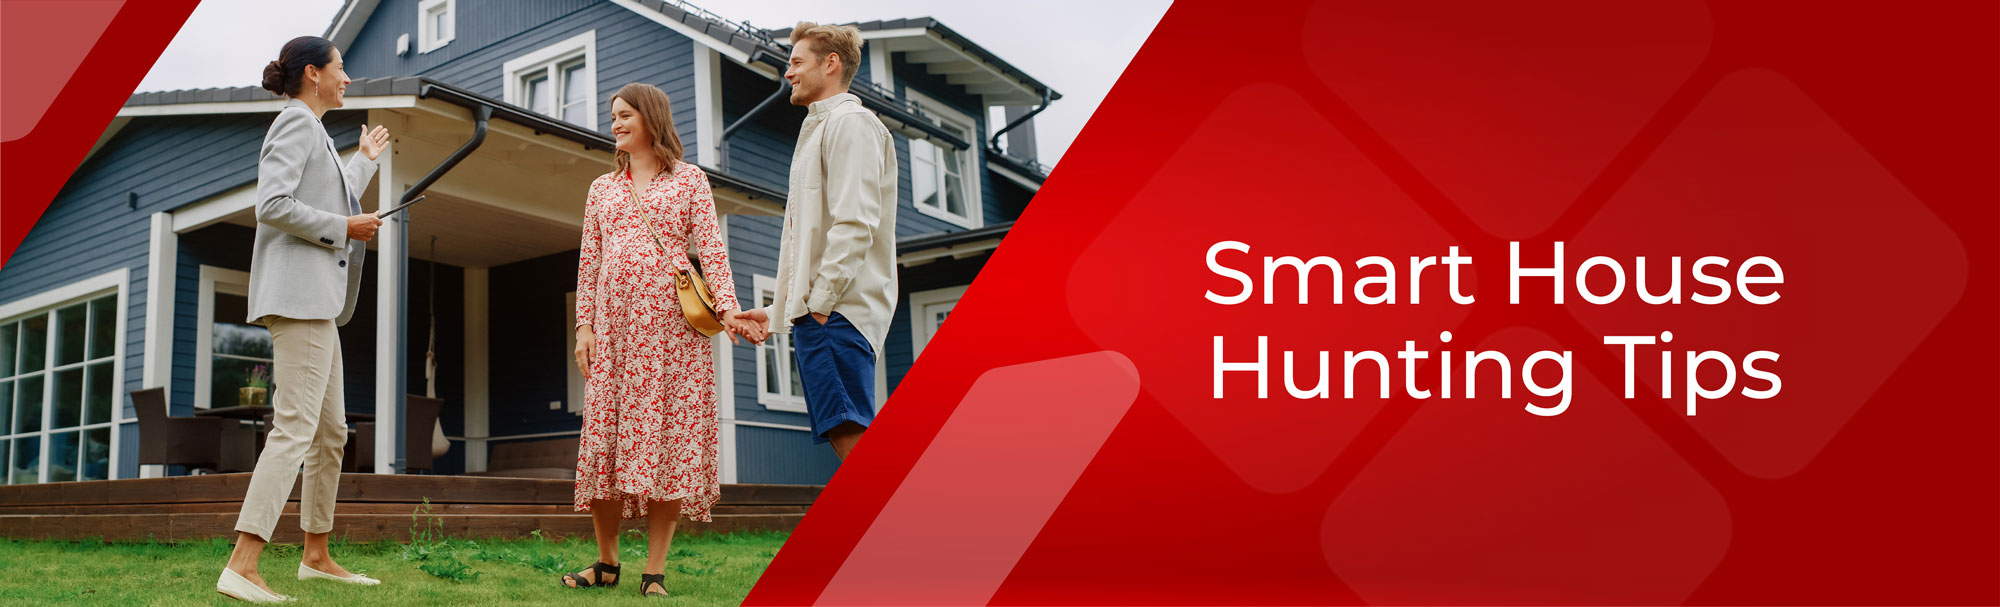 Smart house hunting tips - couple talking with realtor outside of a home